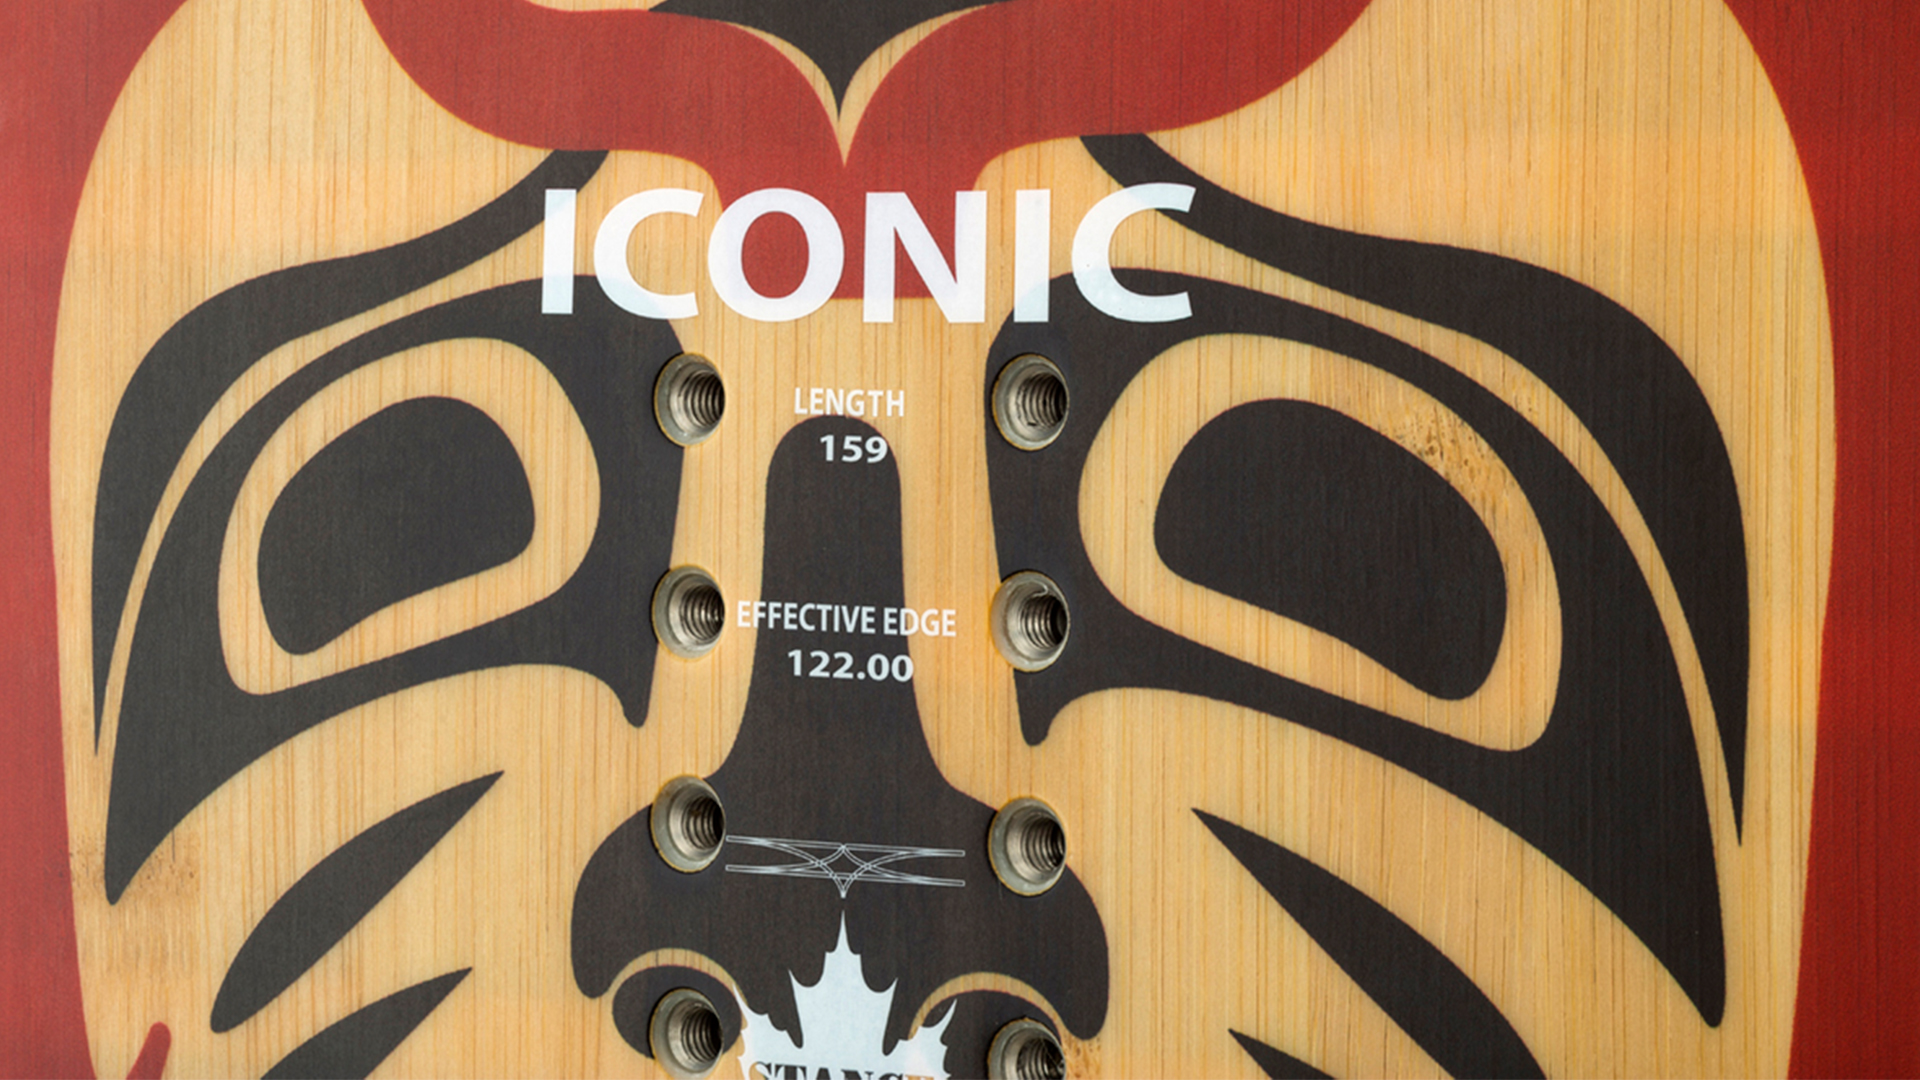 Yunika Iconic product photos, features First Nation Totem design